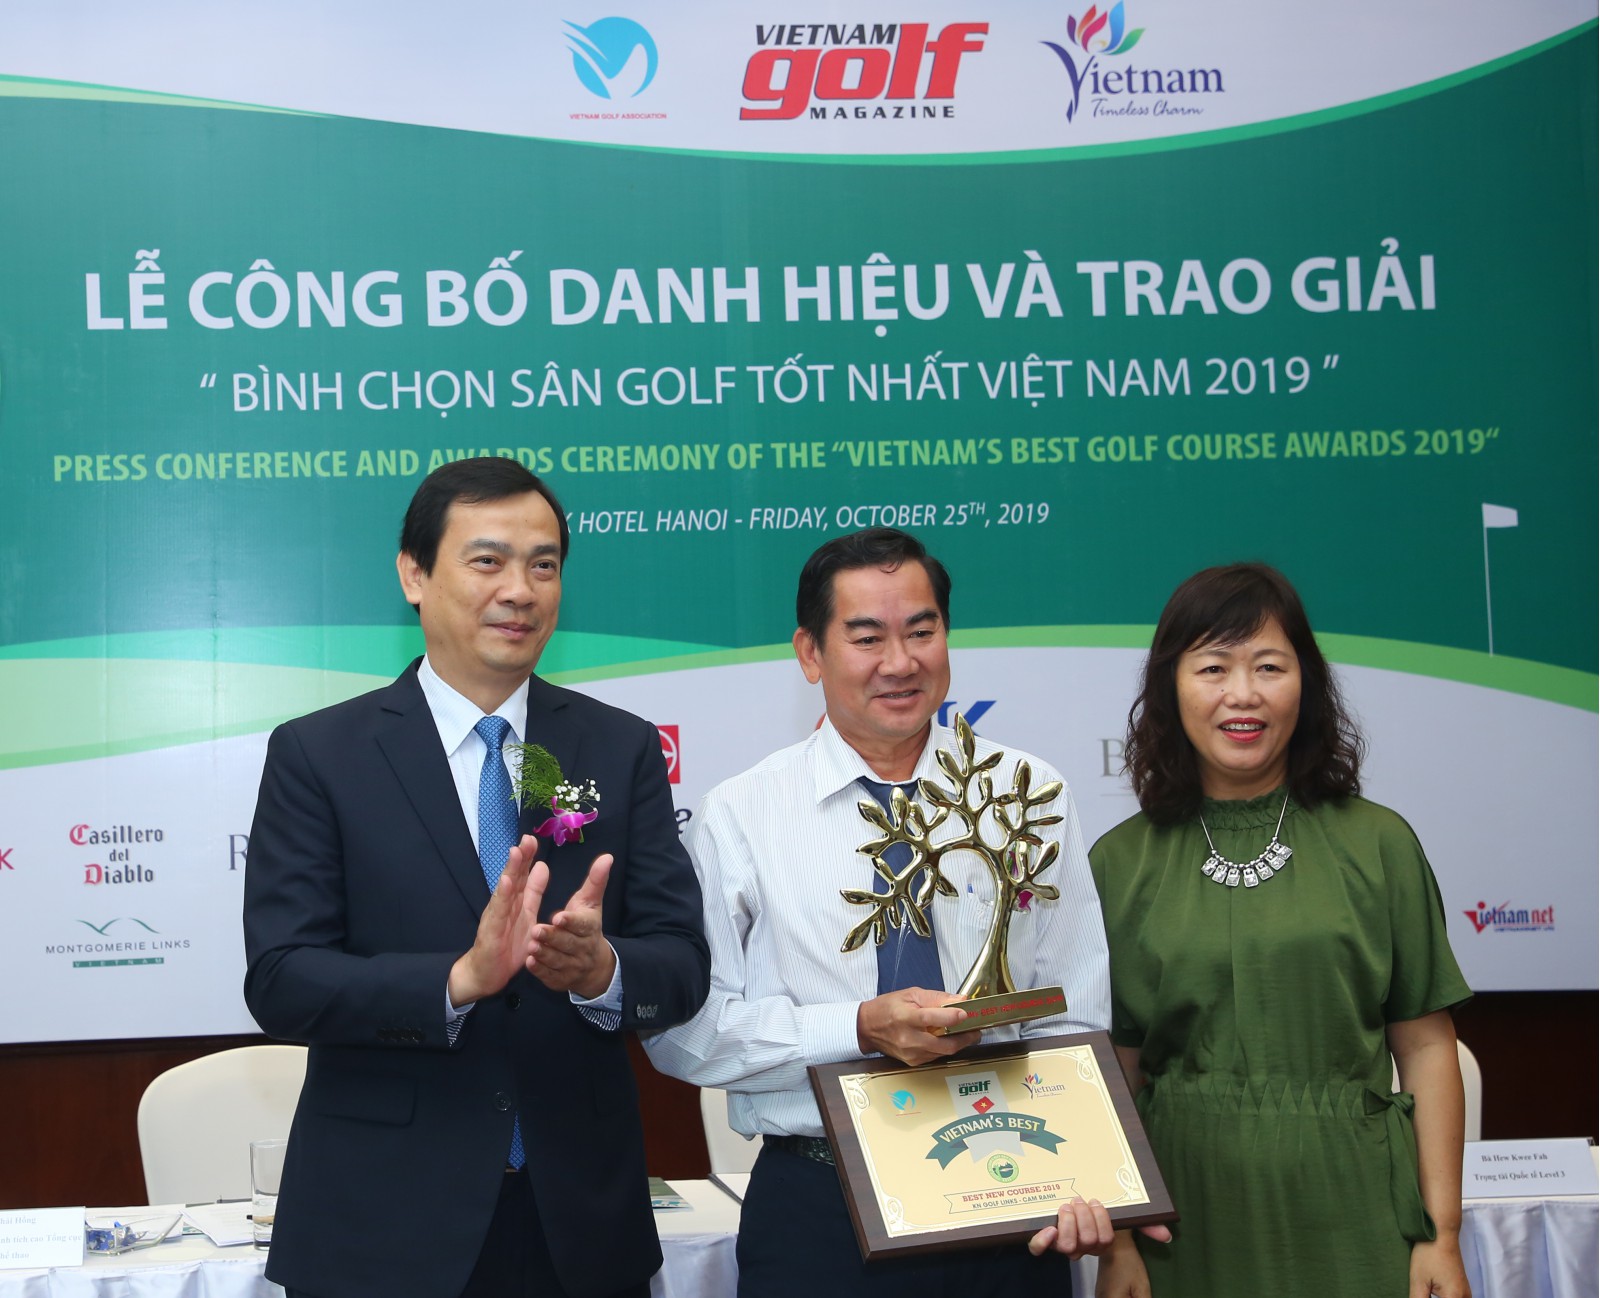 The Organisation Board gave Certificate for Mr. Nguyen Huu Thanh, Deputy GM of KN Golf Links Cam Ranh (the course wins the title "Vietnam's Best New Course 2019"